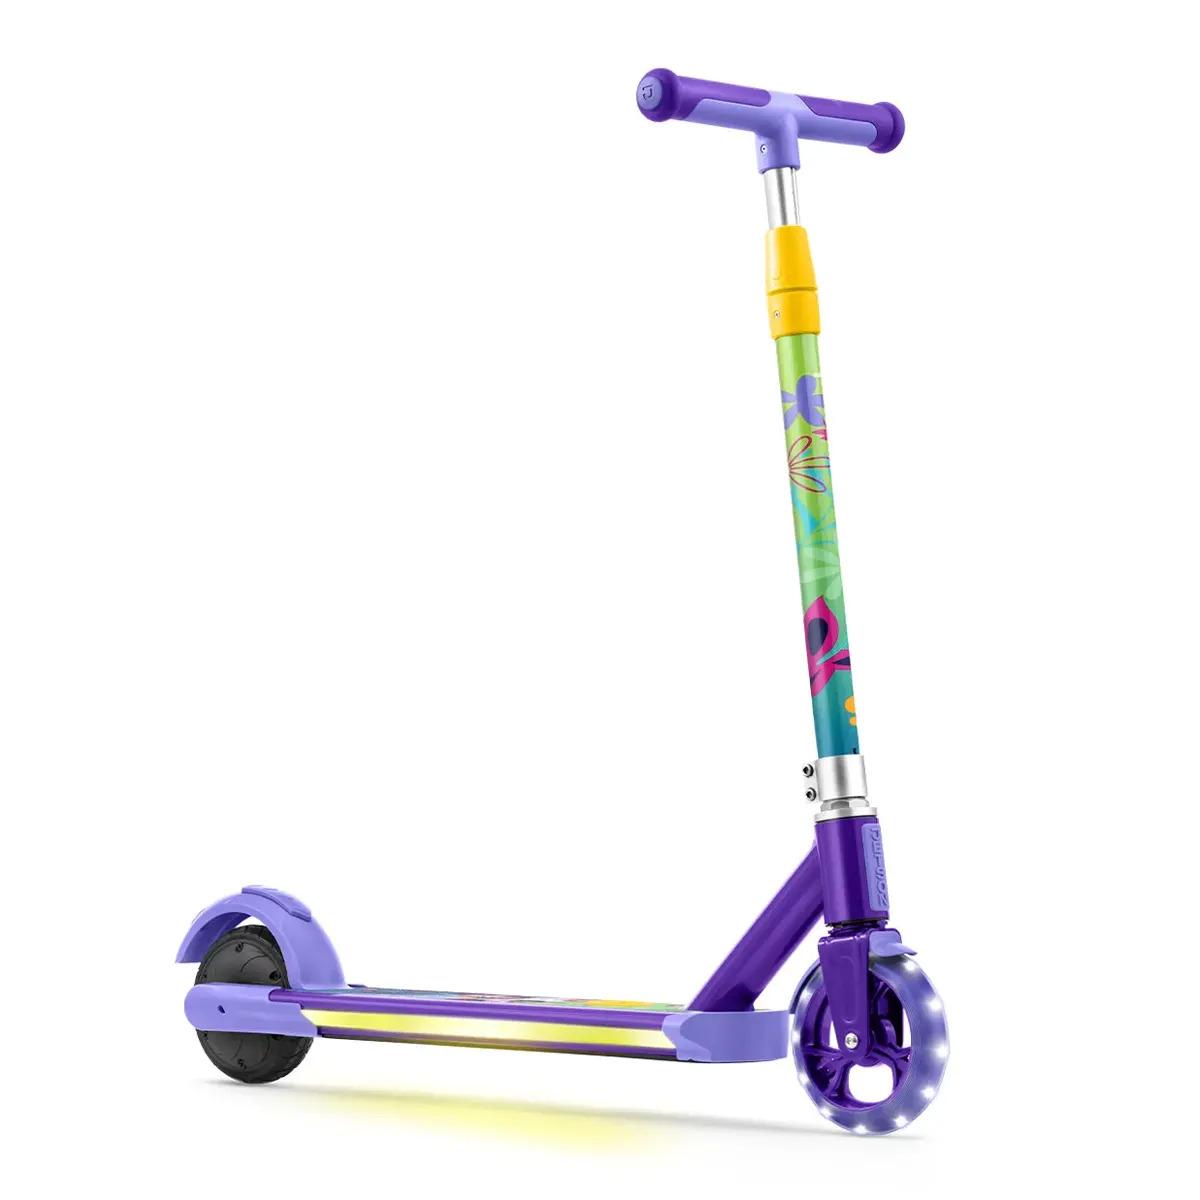 Disney Encanto Kids Electric Scooter for $49 Shipped